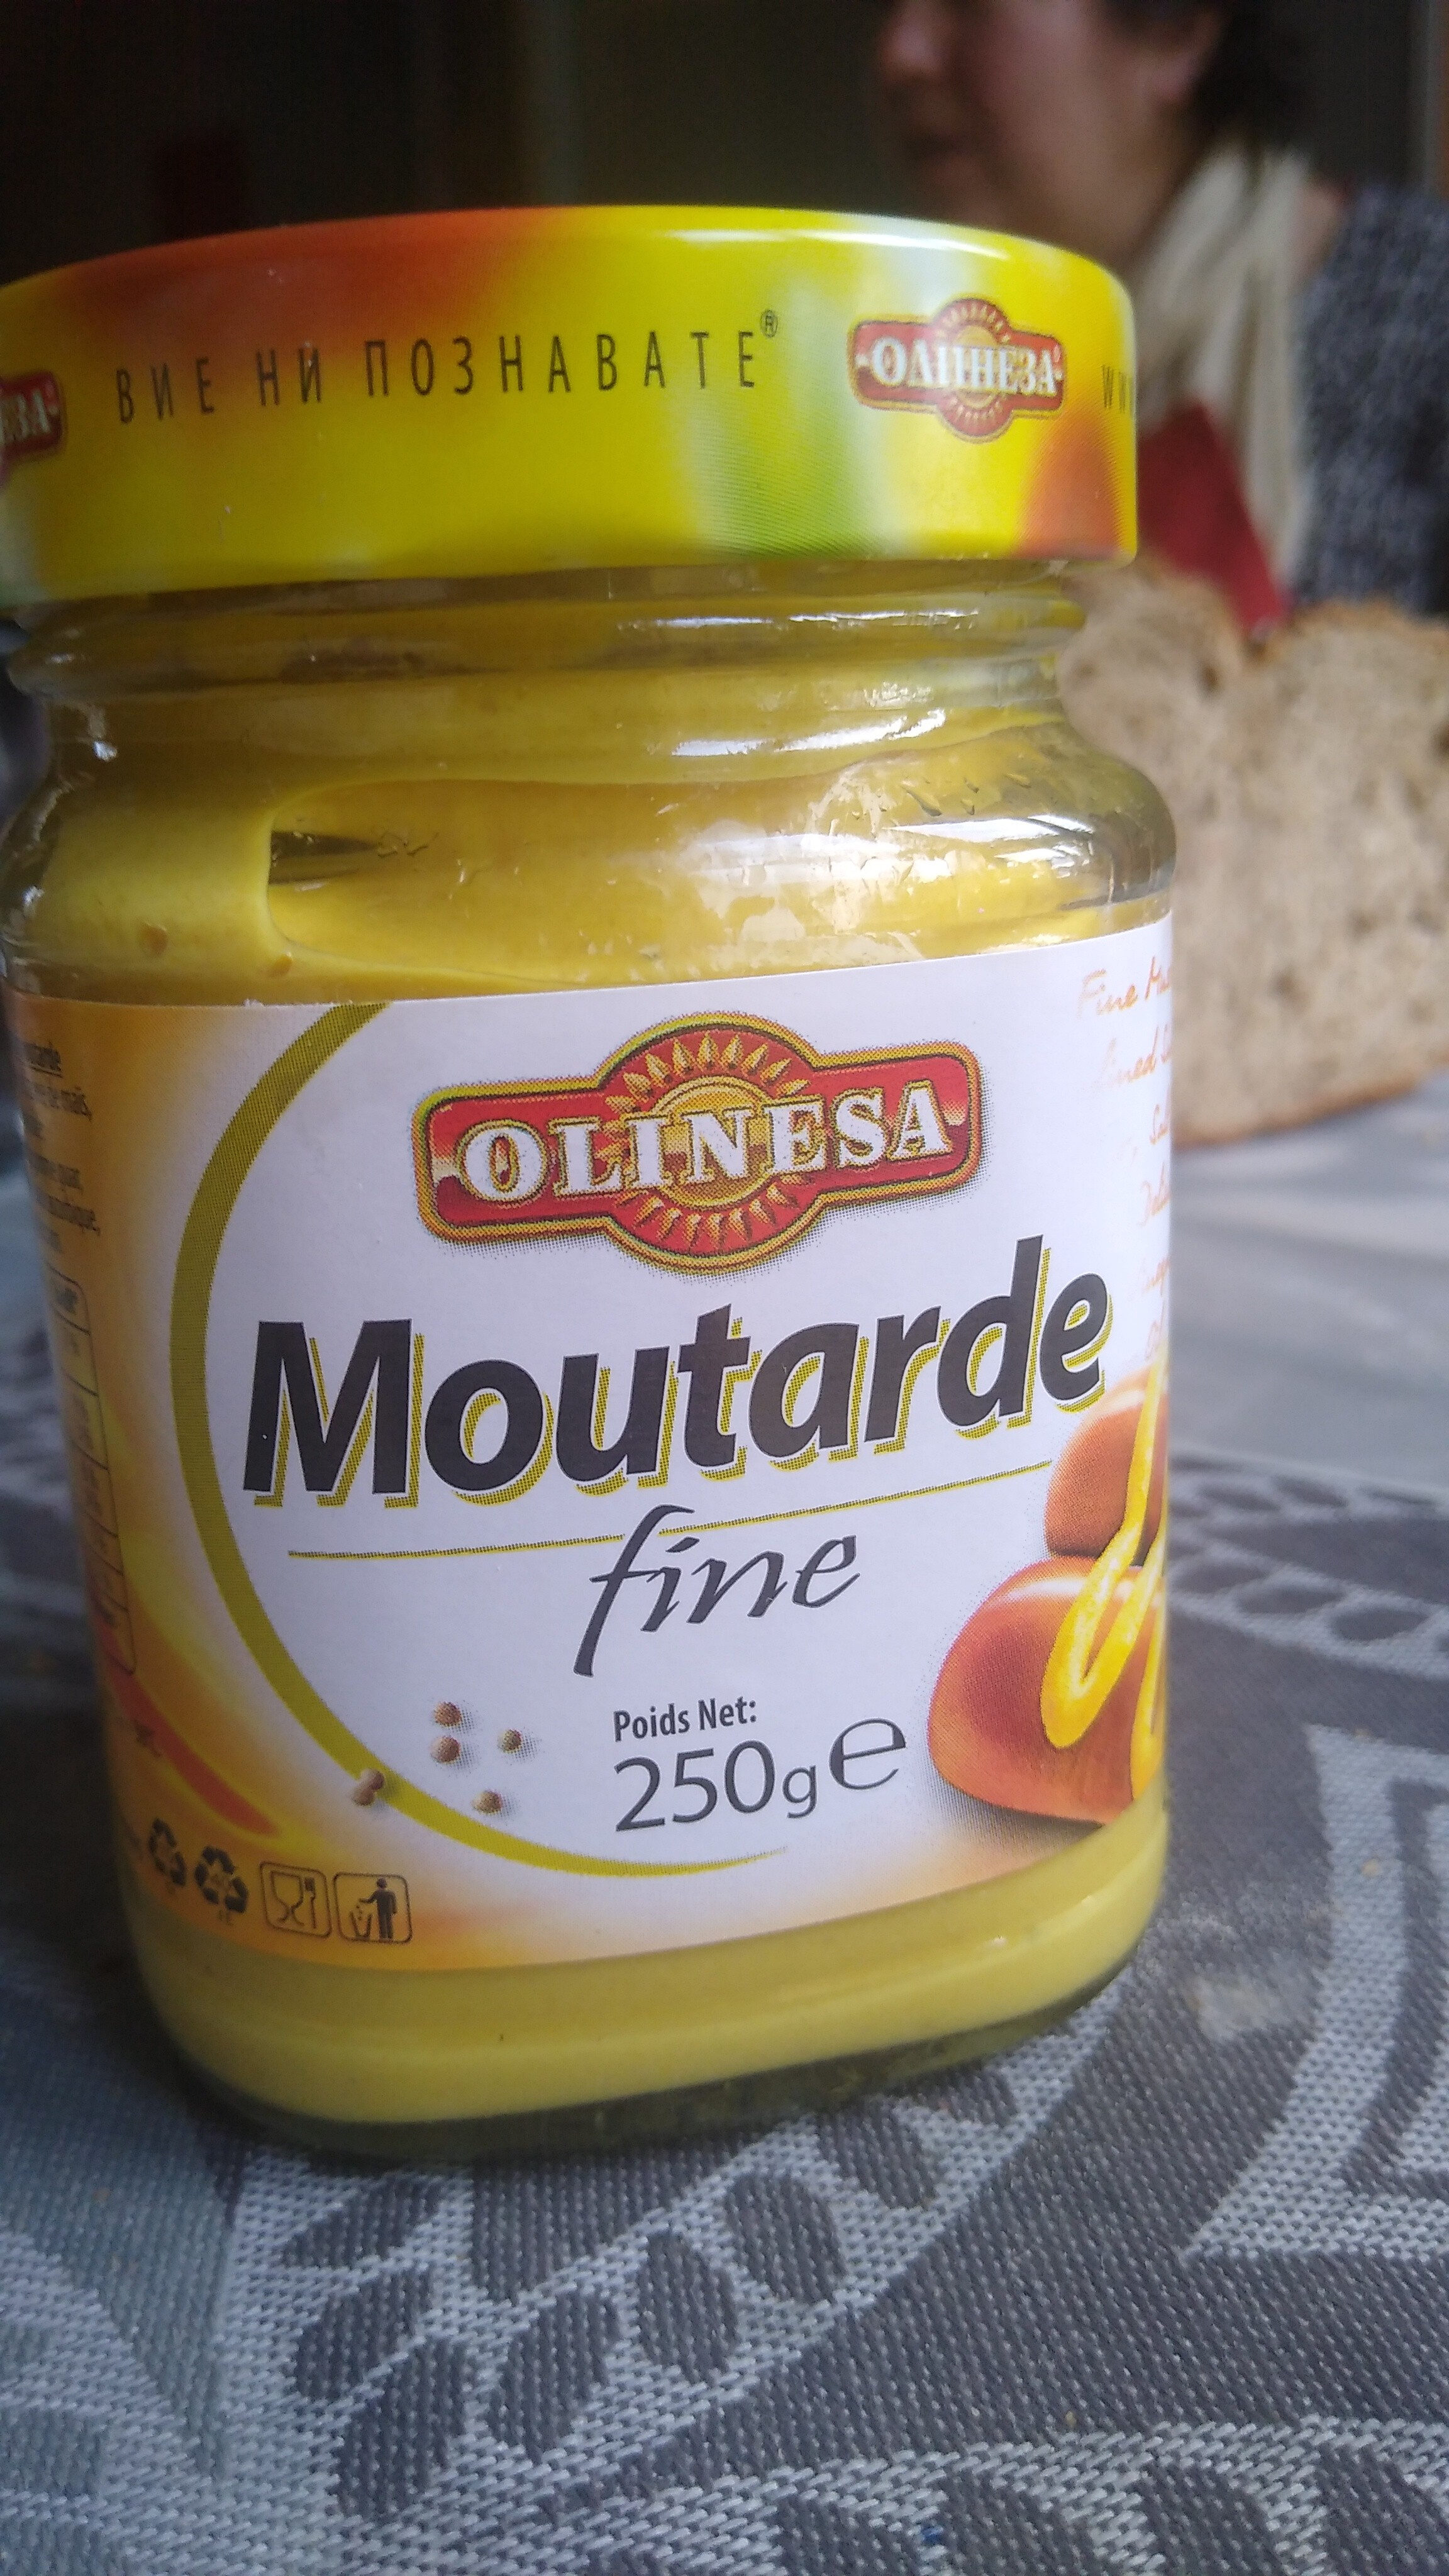 moutarde fine - Product - fr